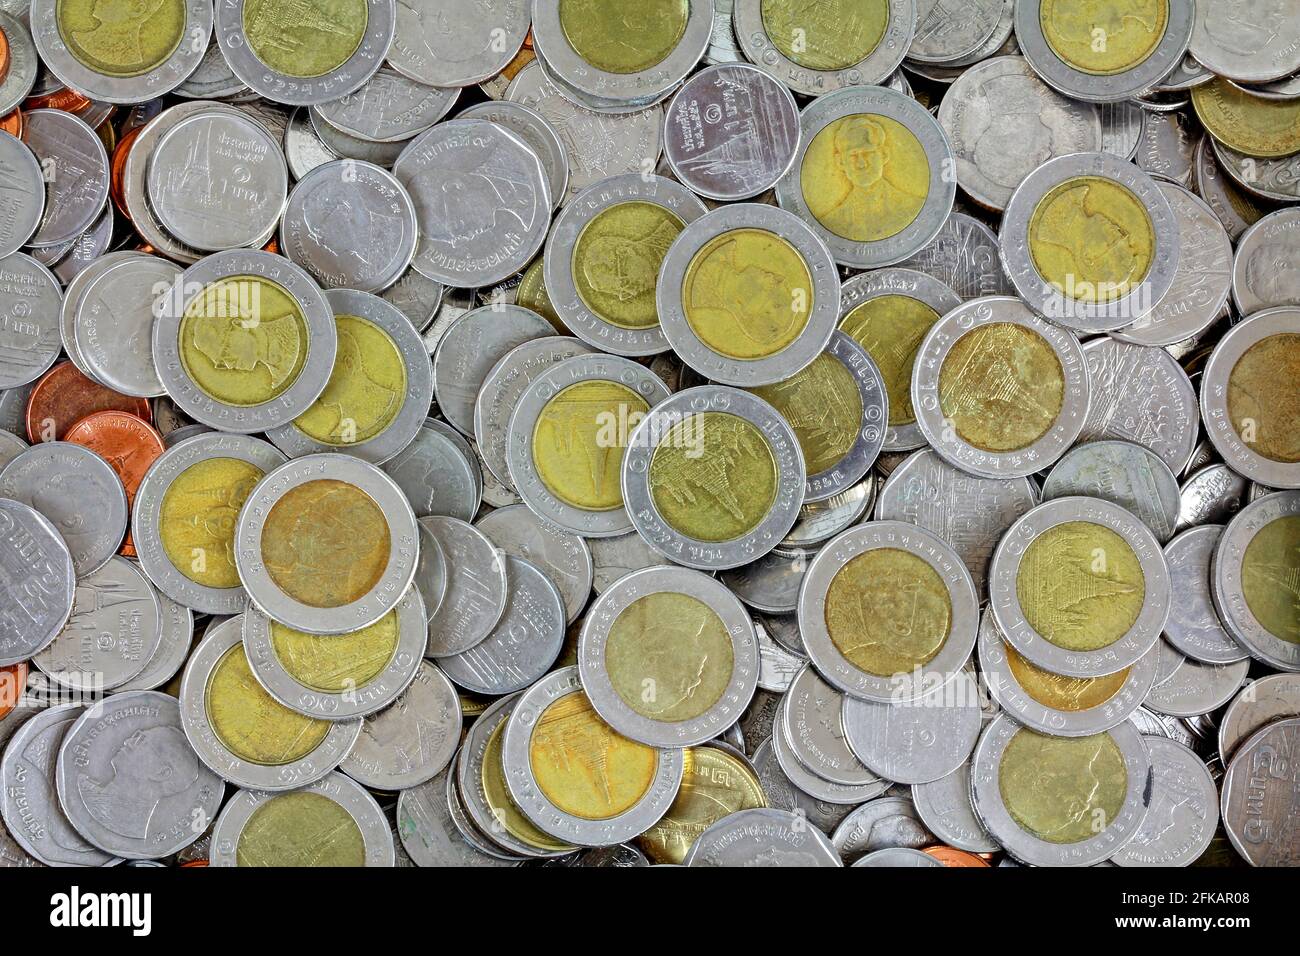 Different types of the Thai Baht coins Stock Photo